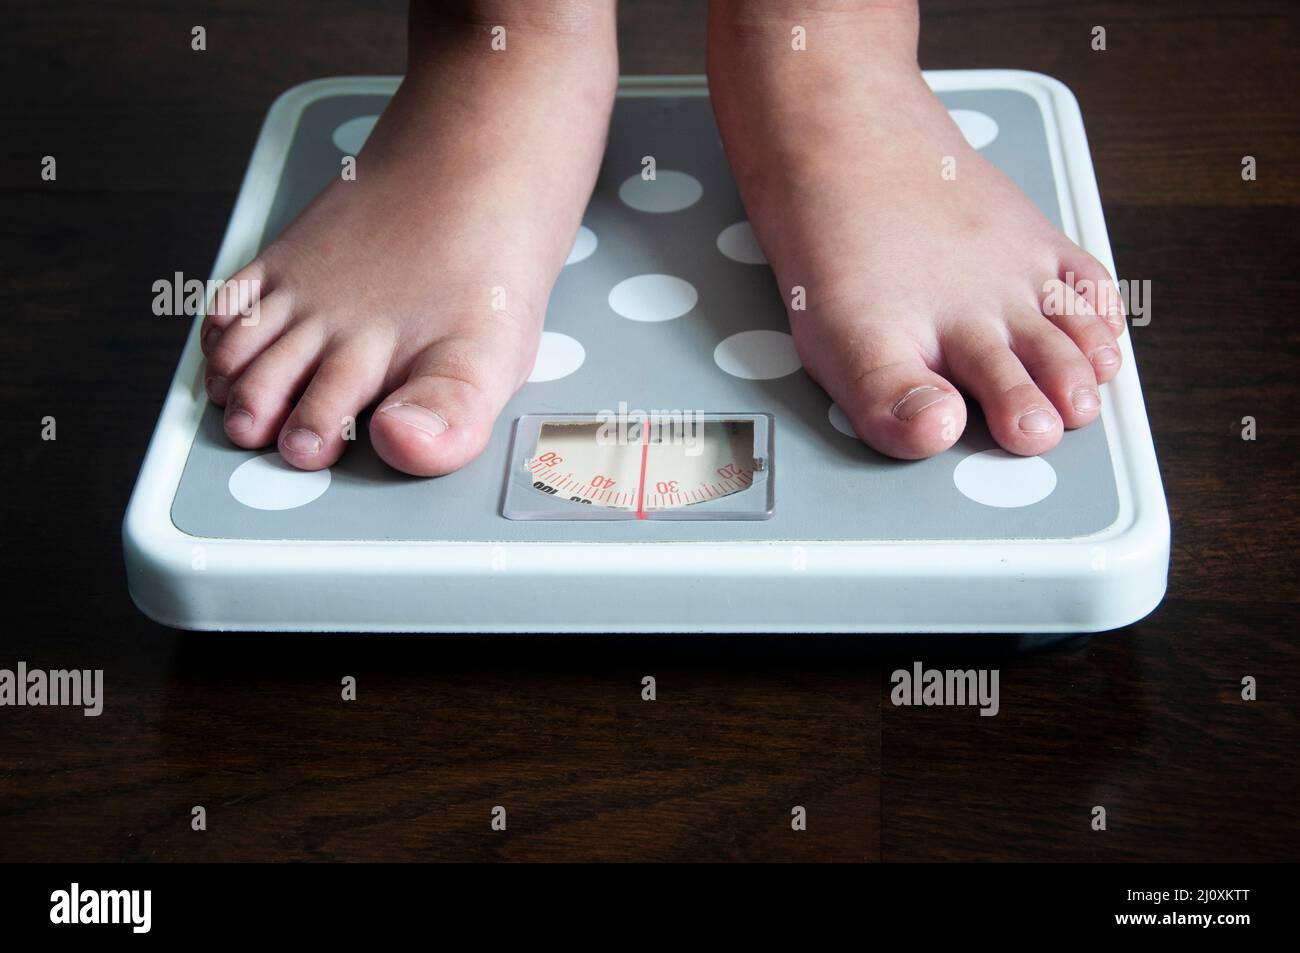 Straight view of feet on weight scale . Weight loss and fitness concept. Stock Photo